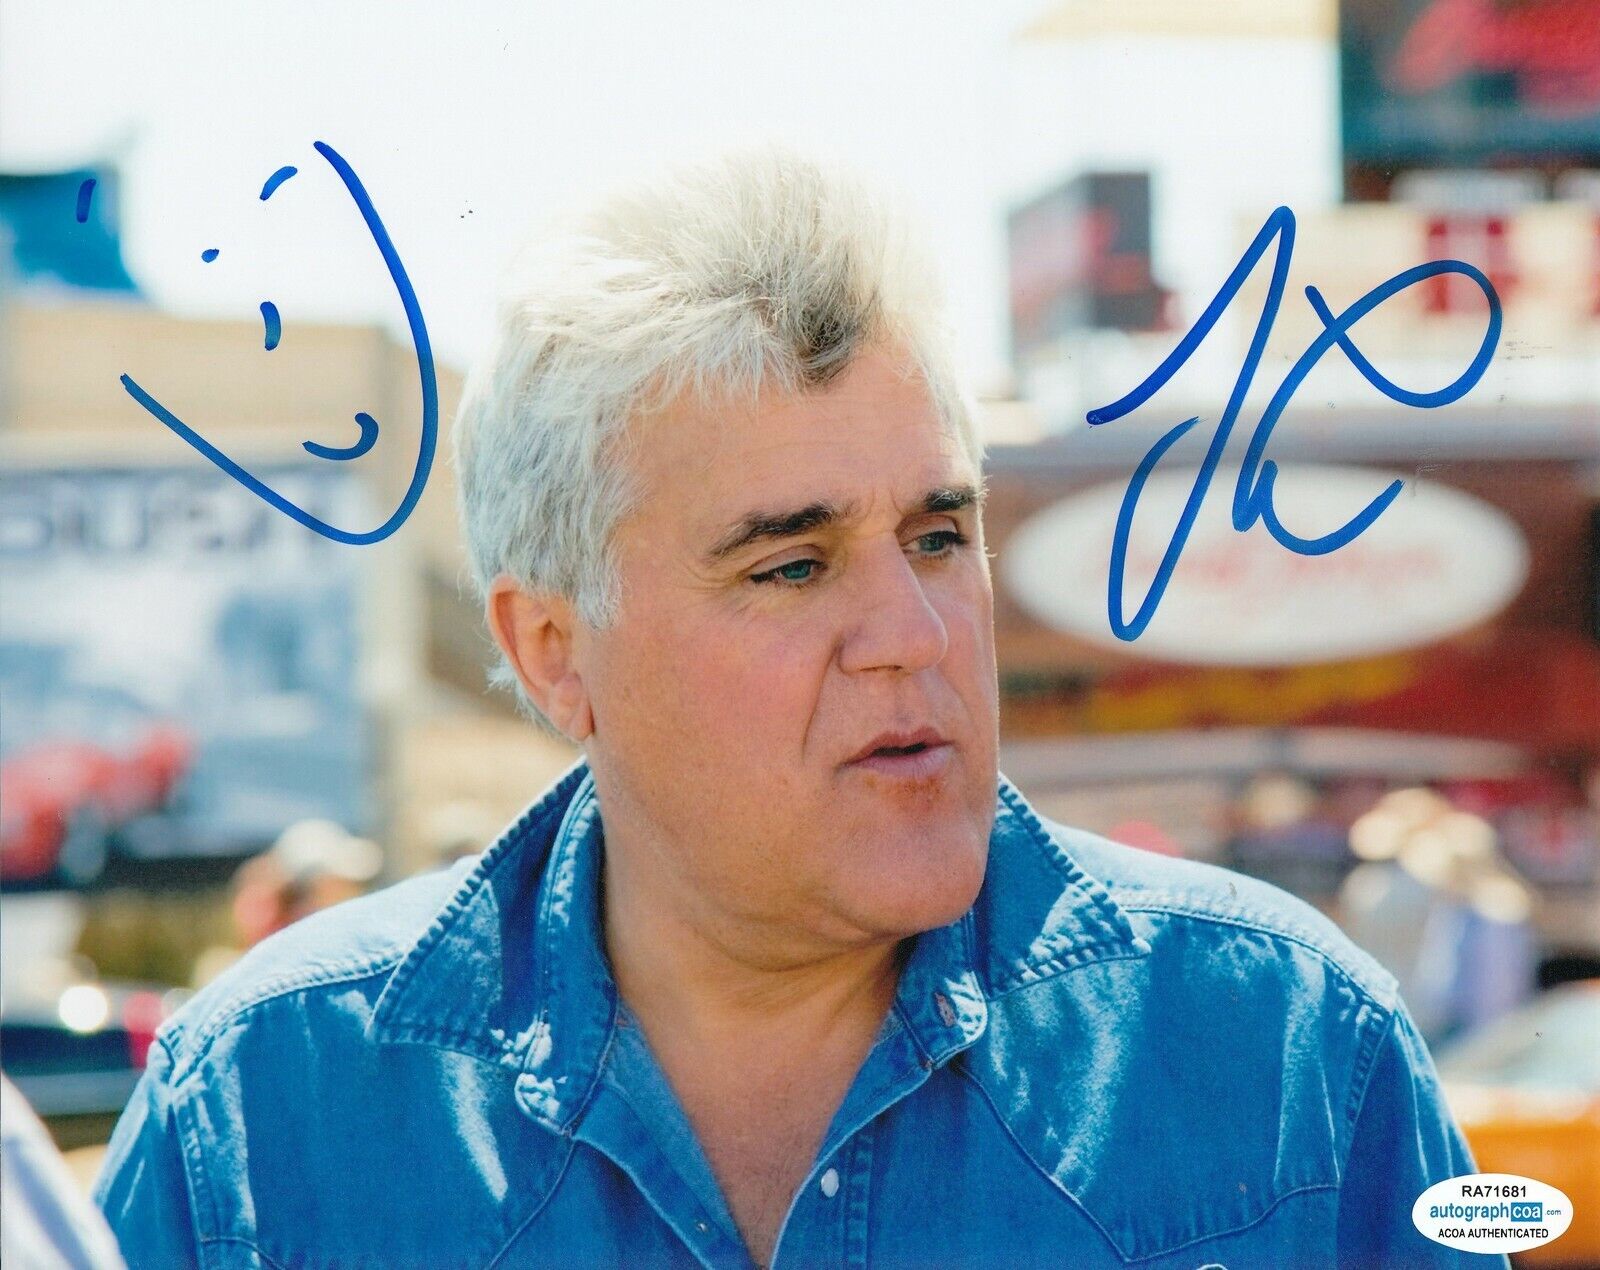 JAY LENO signed (THE TONIGHT SHOW) 8x10 Photo Poster painting autographed ACOA Authentic #2